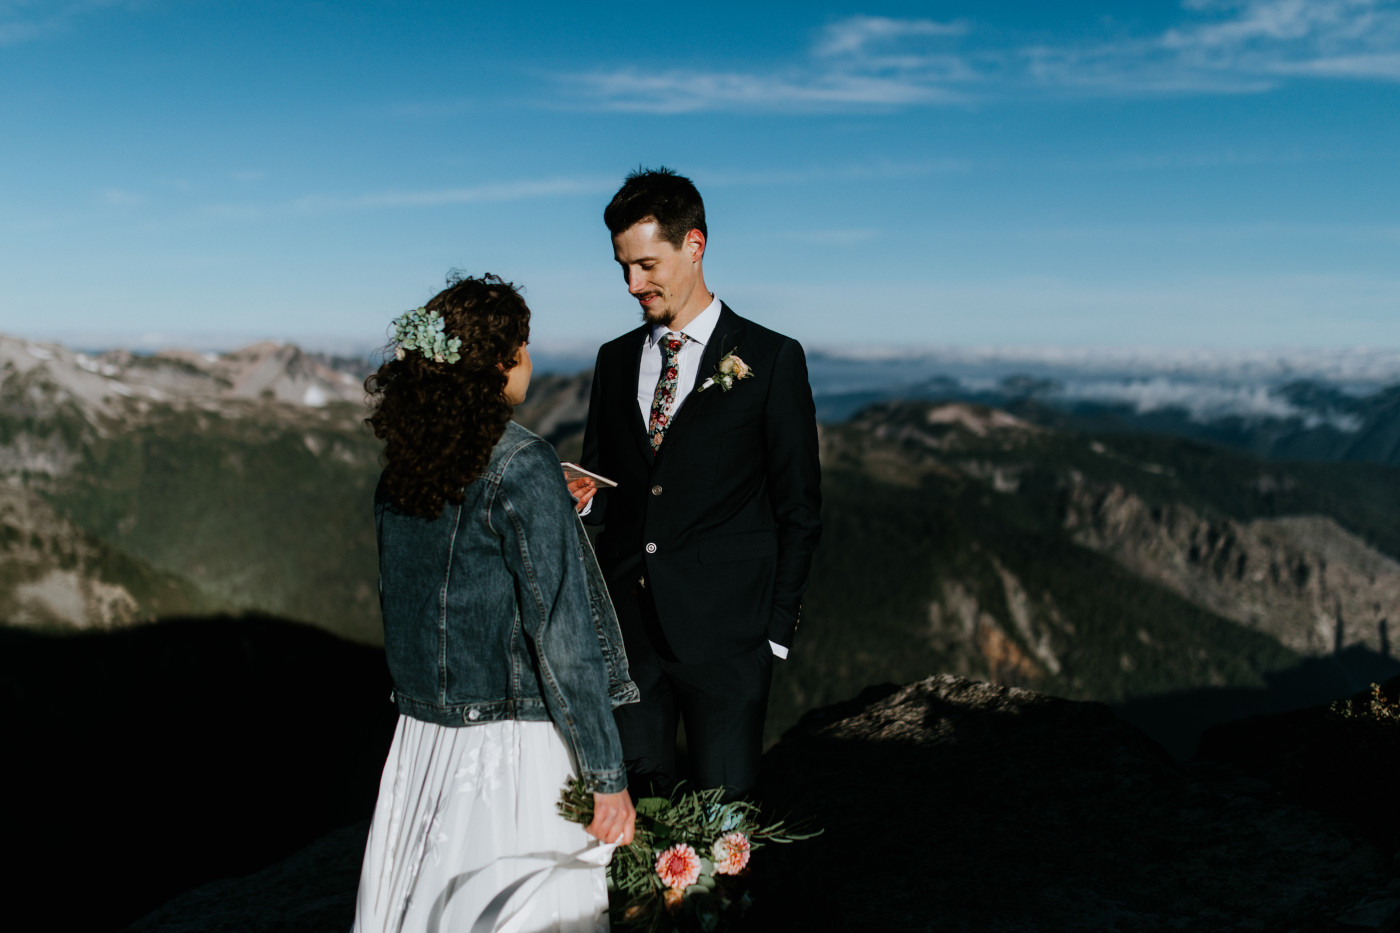 Tasha and Chad during their vows. Elopement photography at Mount Rainier by Sienna Plus Josh.